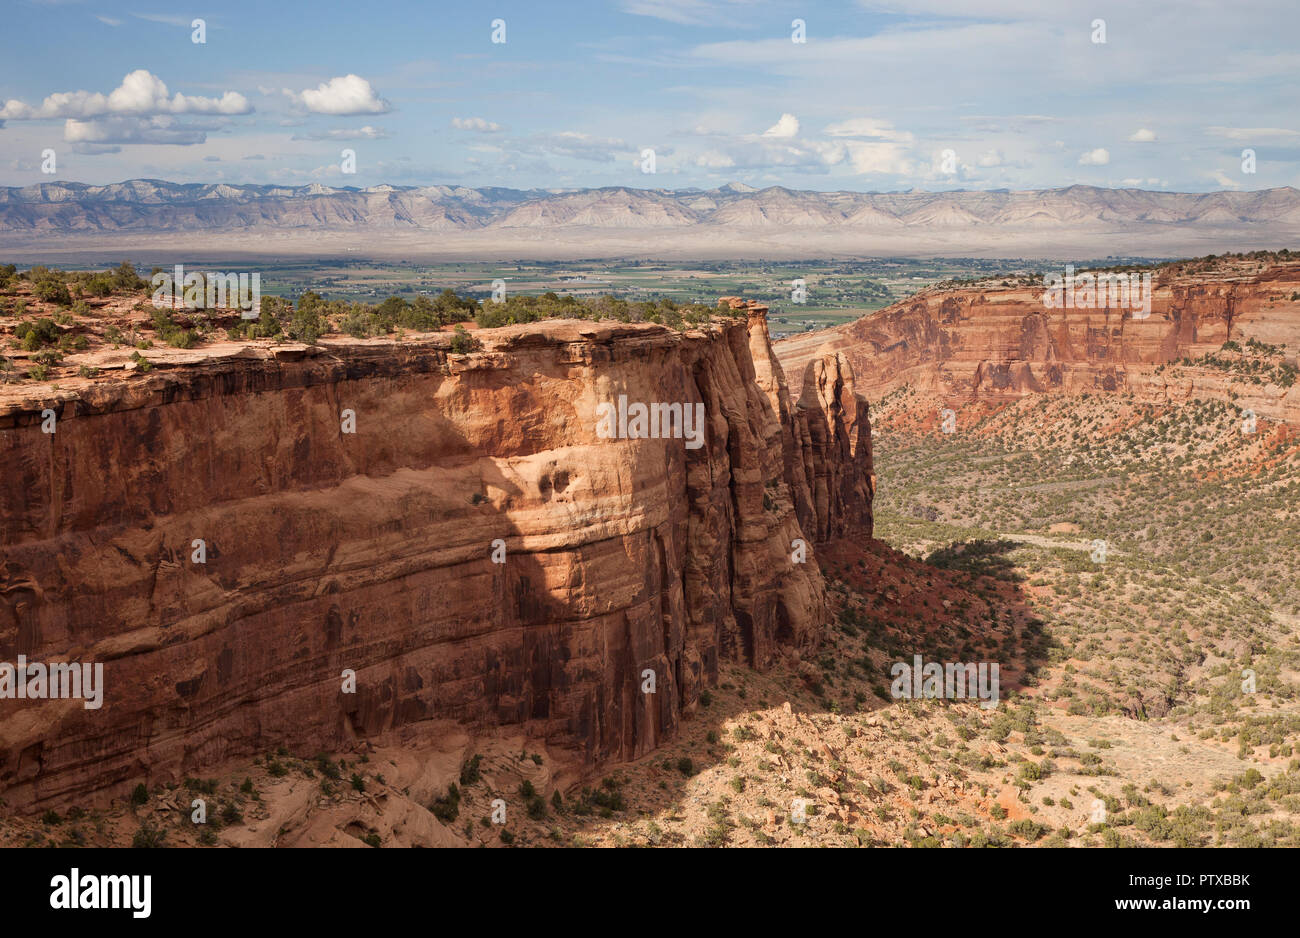 Independence Monument, Colorado National Monument in Colorado, USA Stockfoto